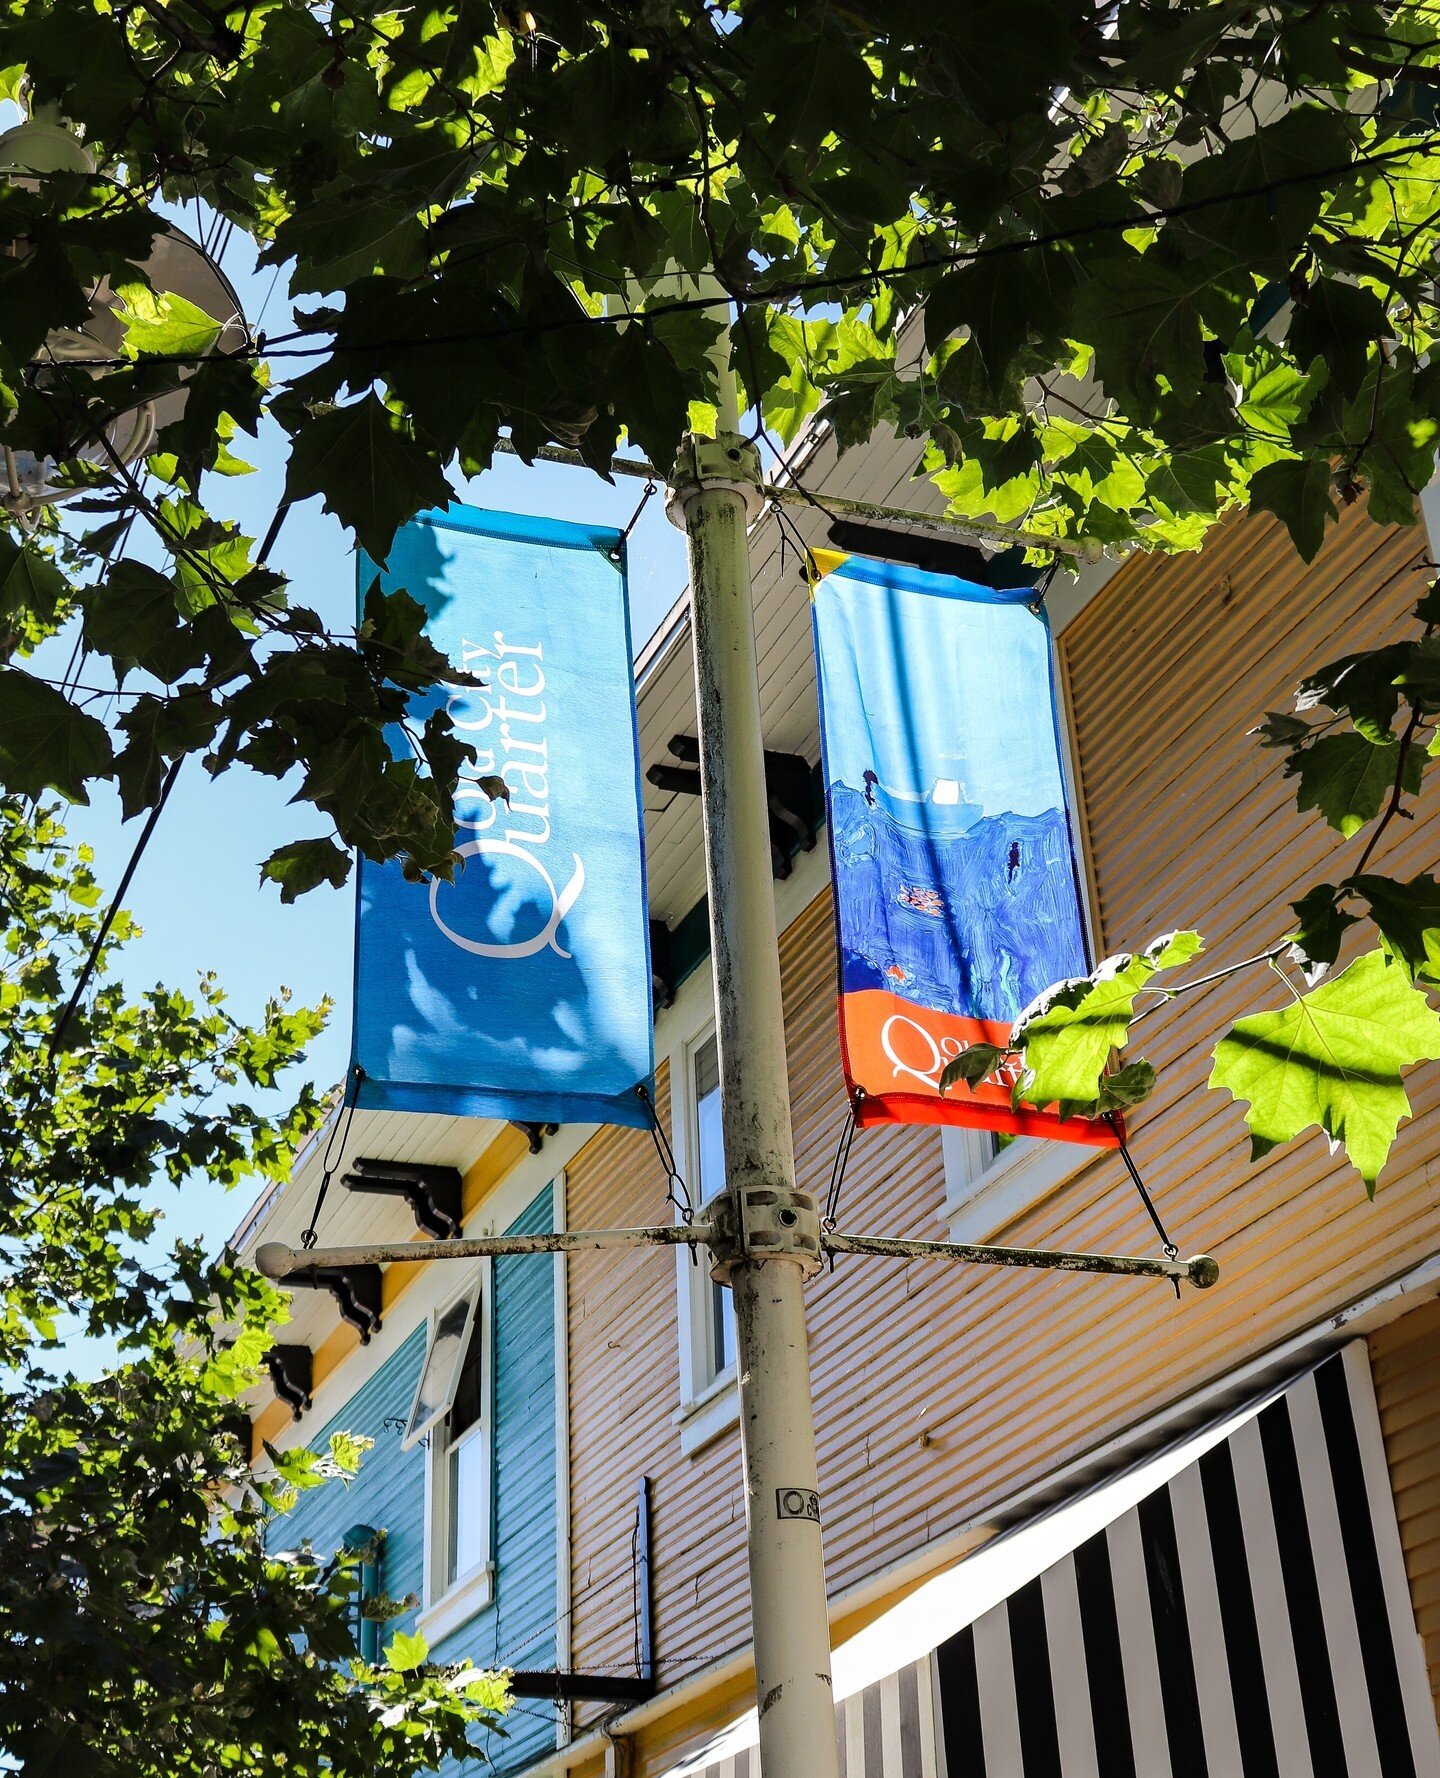 Have you spotted the bright new banners on Wesley Street yet? Check out the amazing artwork by students at Park Avenue Elementary 🎨